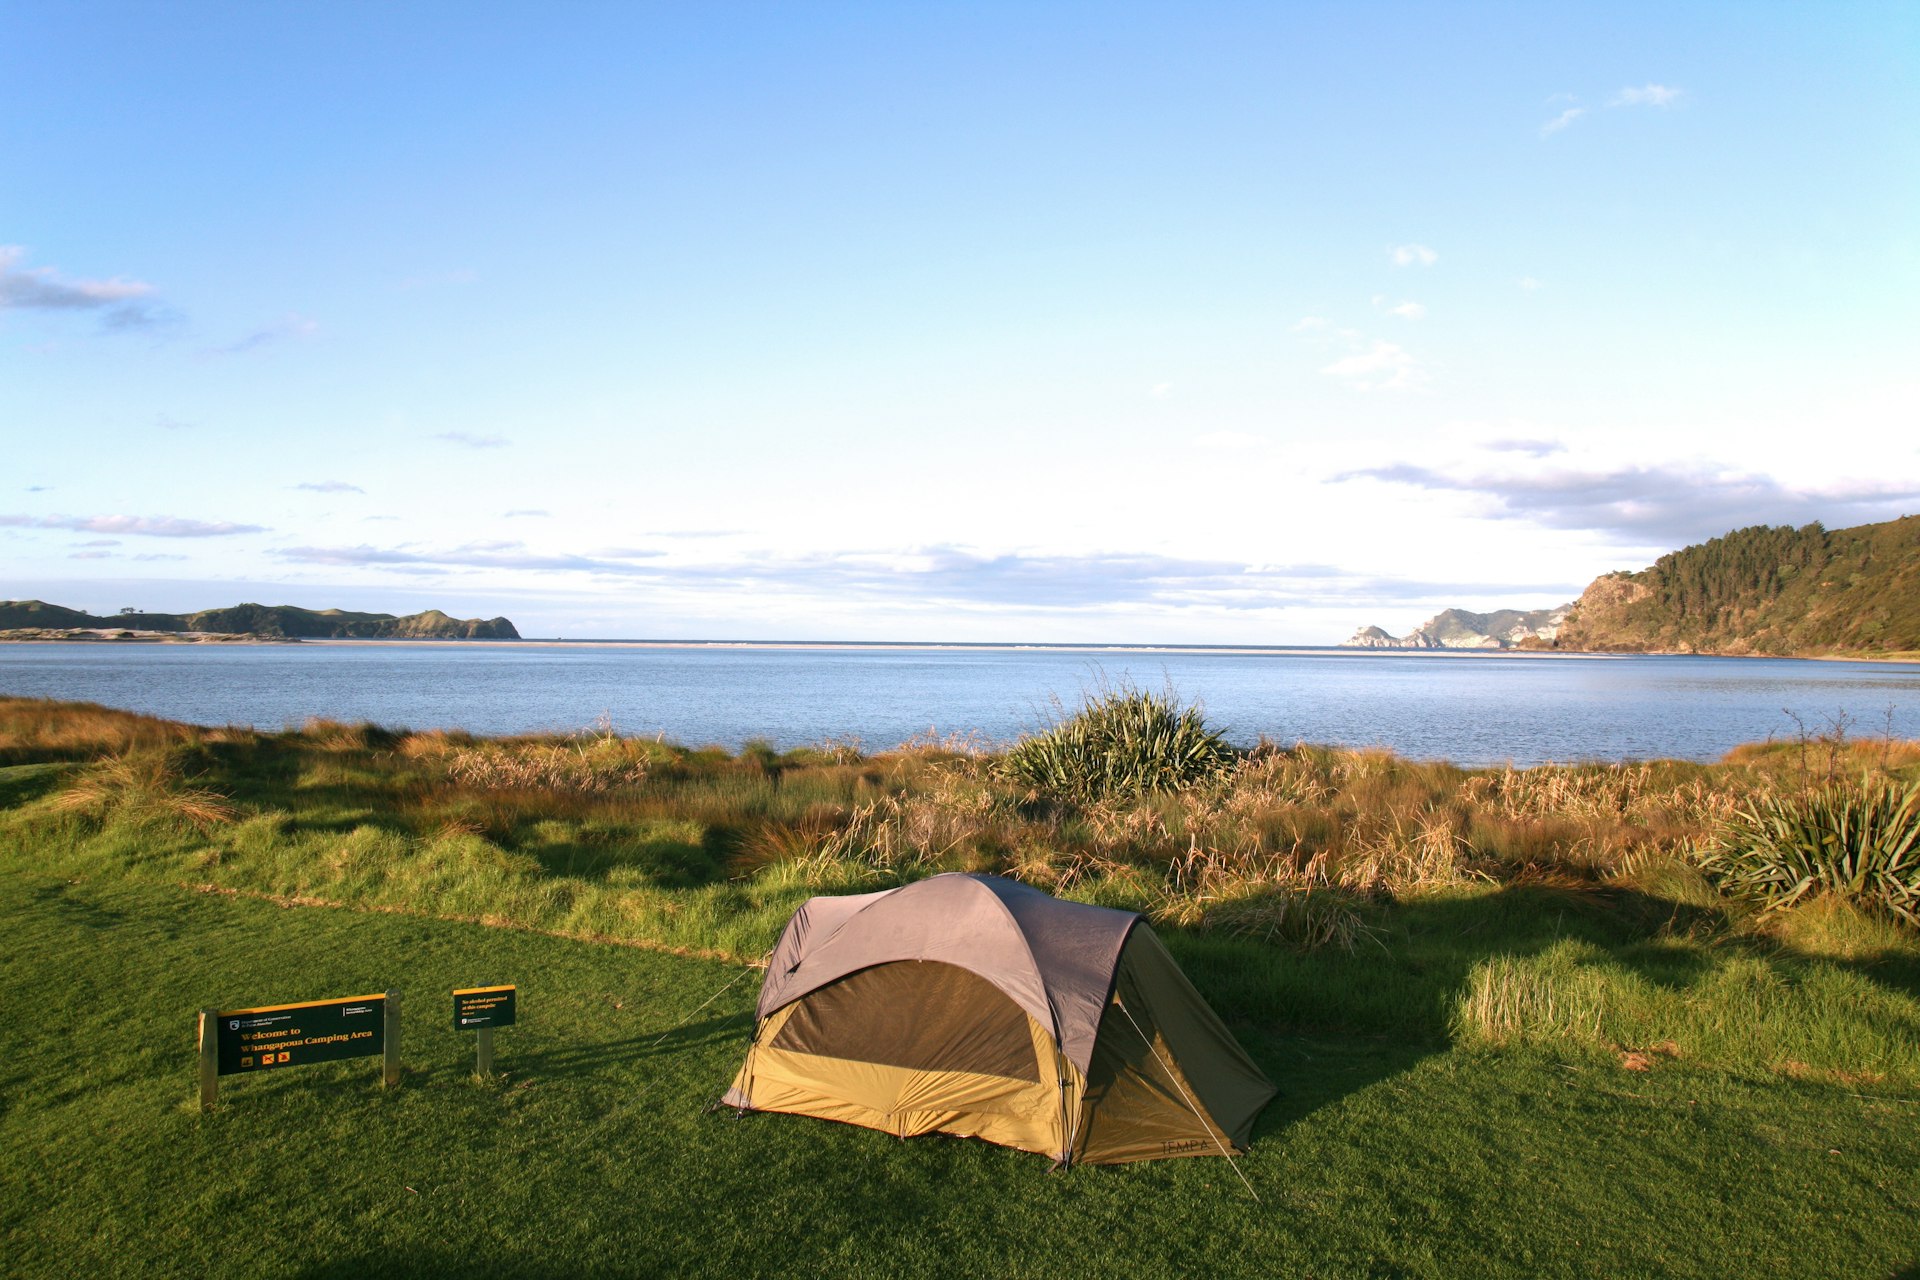 Sea views and free camping on the Great Barrier Island near Auckland New Zealand 